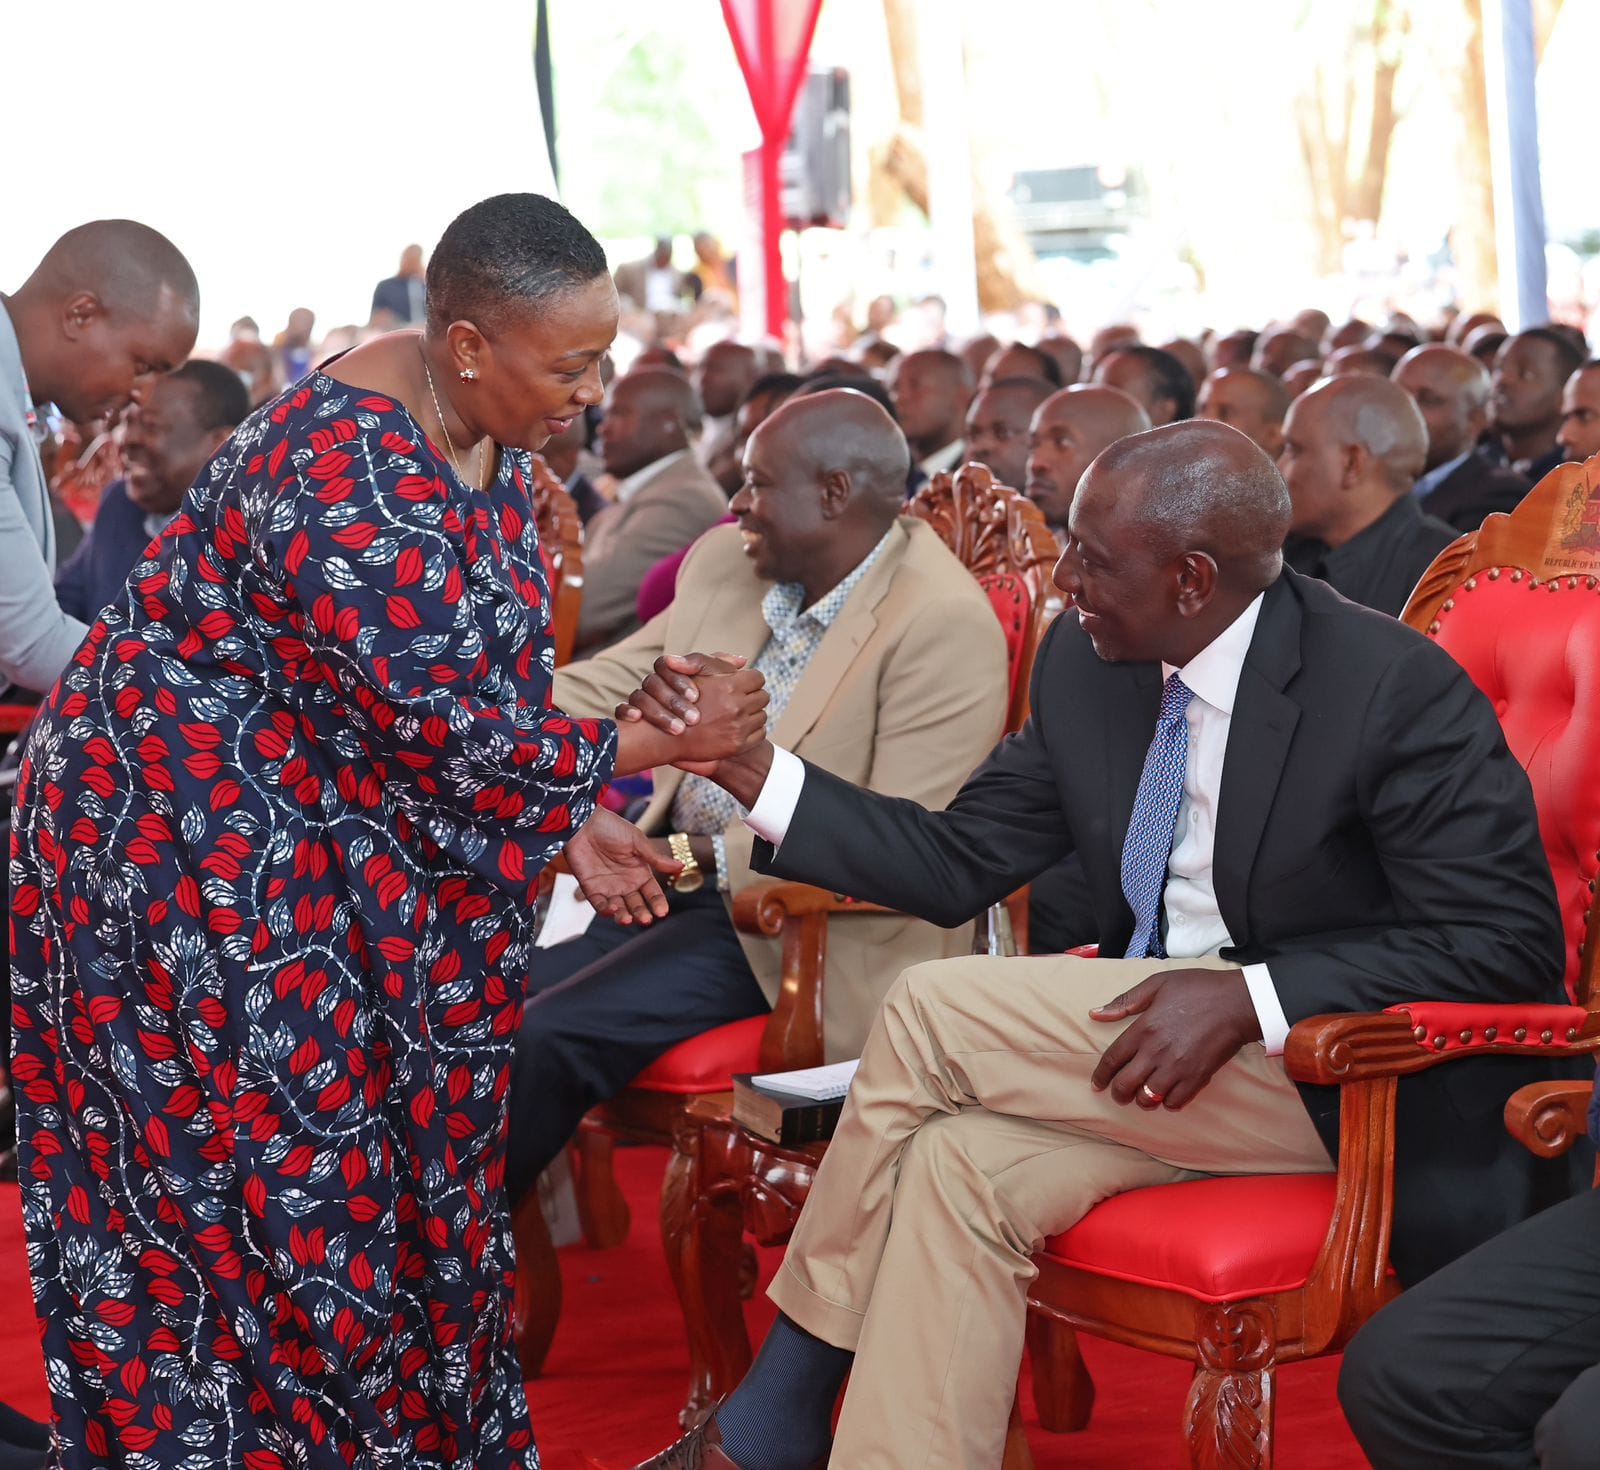 Nominated MP Sabina Chege has told off Azimio over claims made in the past that President William Ruto was going to abandon Mt. Kenya region after his election.